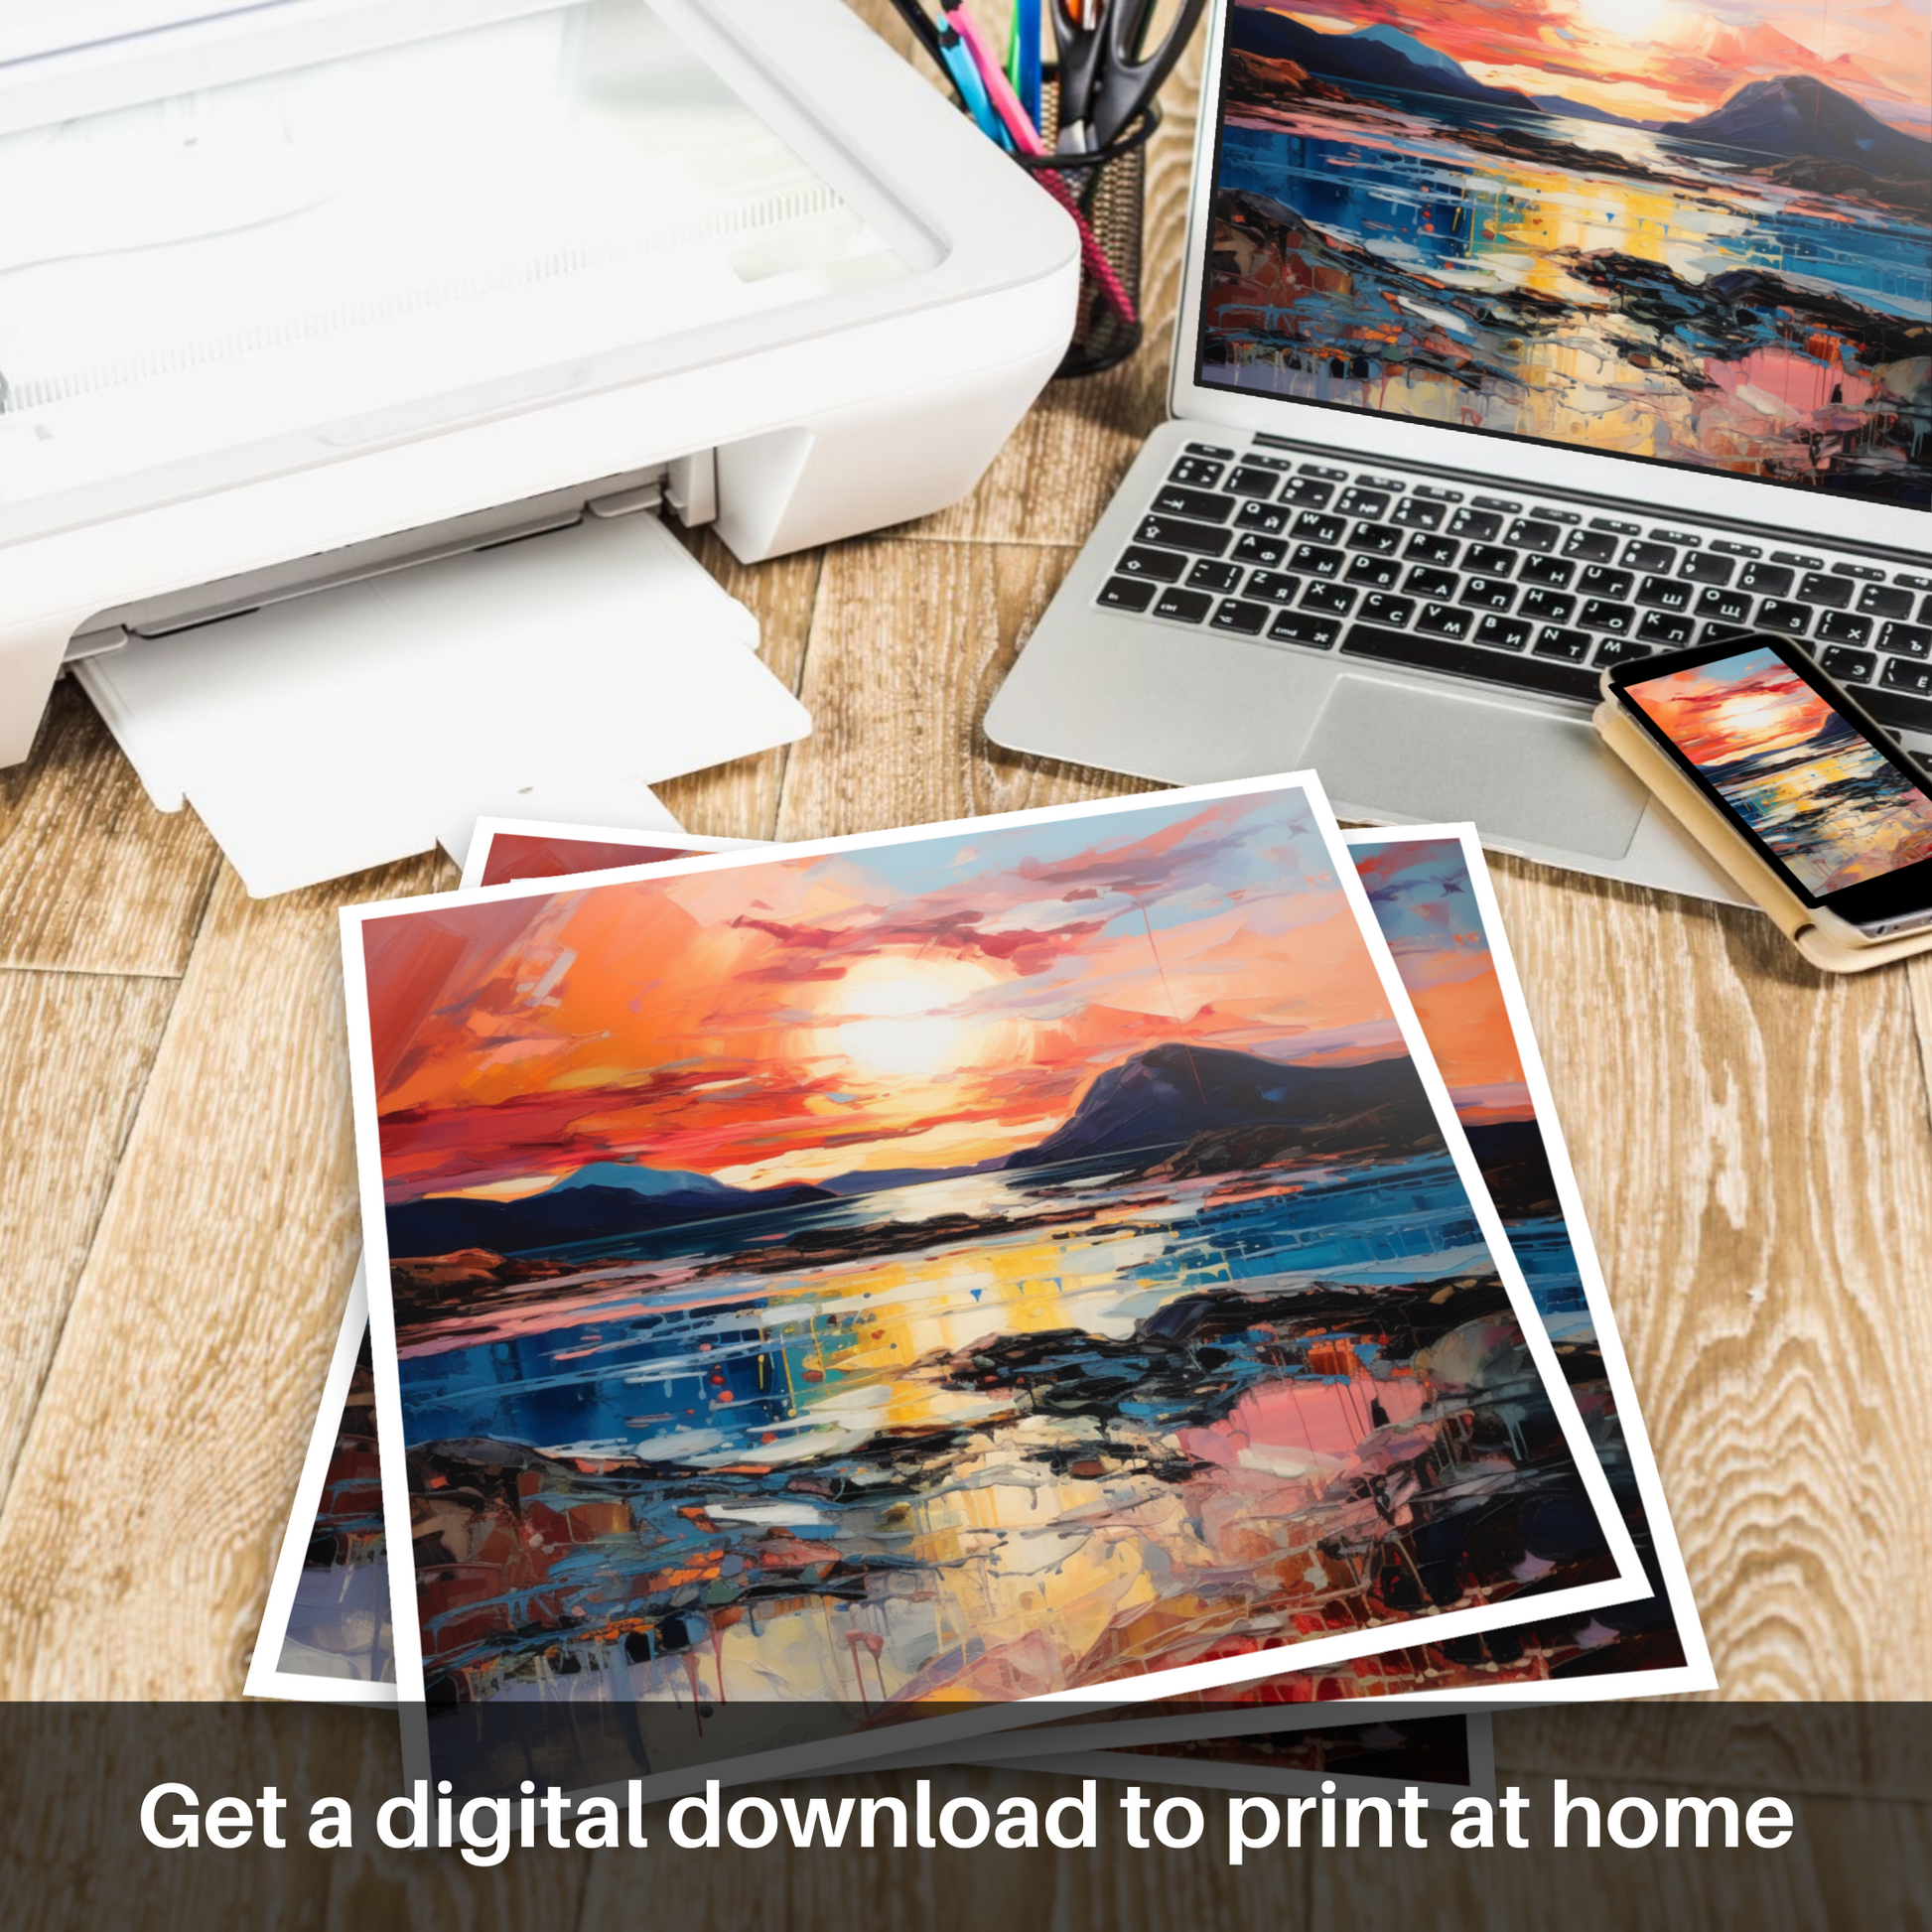 Downloadable and printable picture of Ardtun Bay at sunset